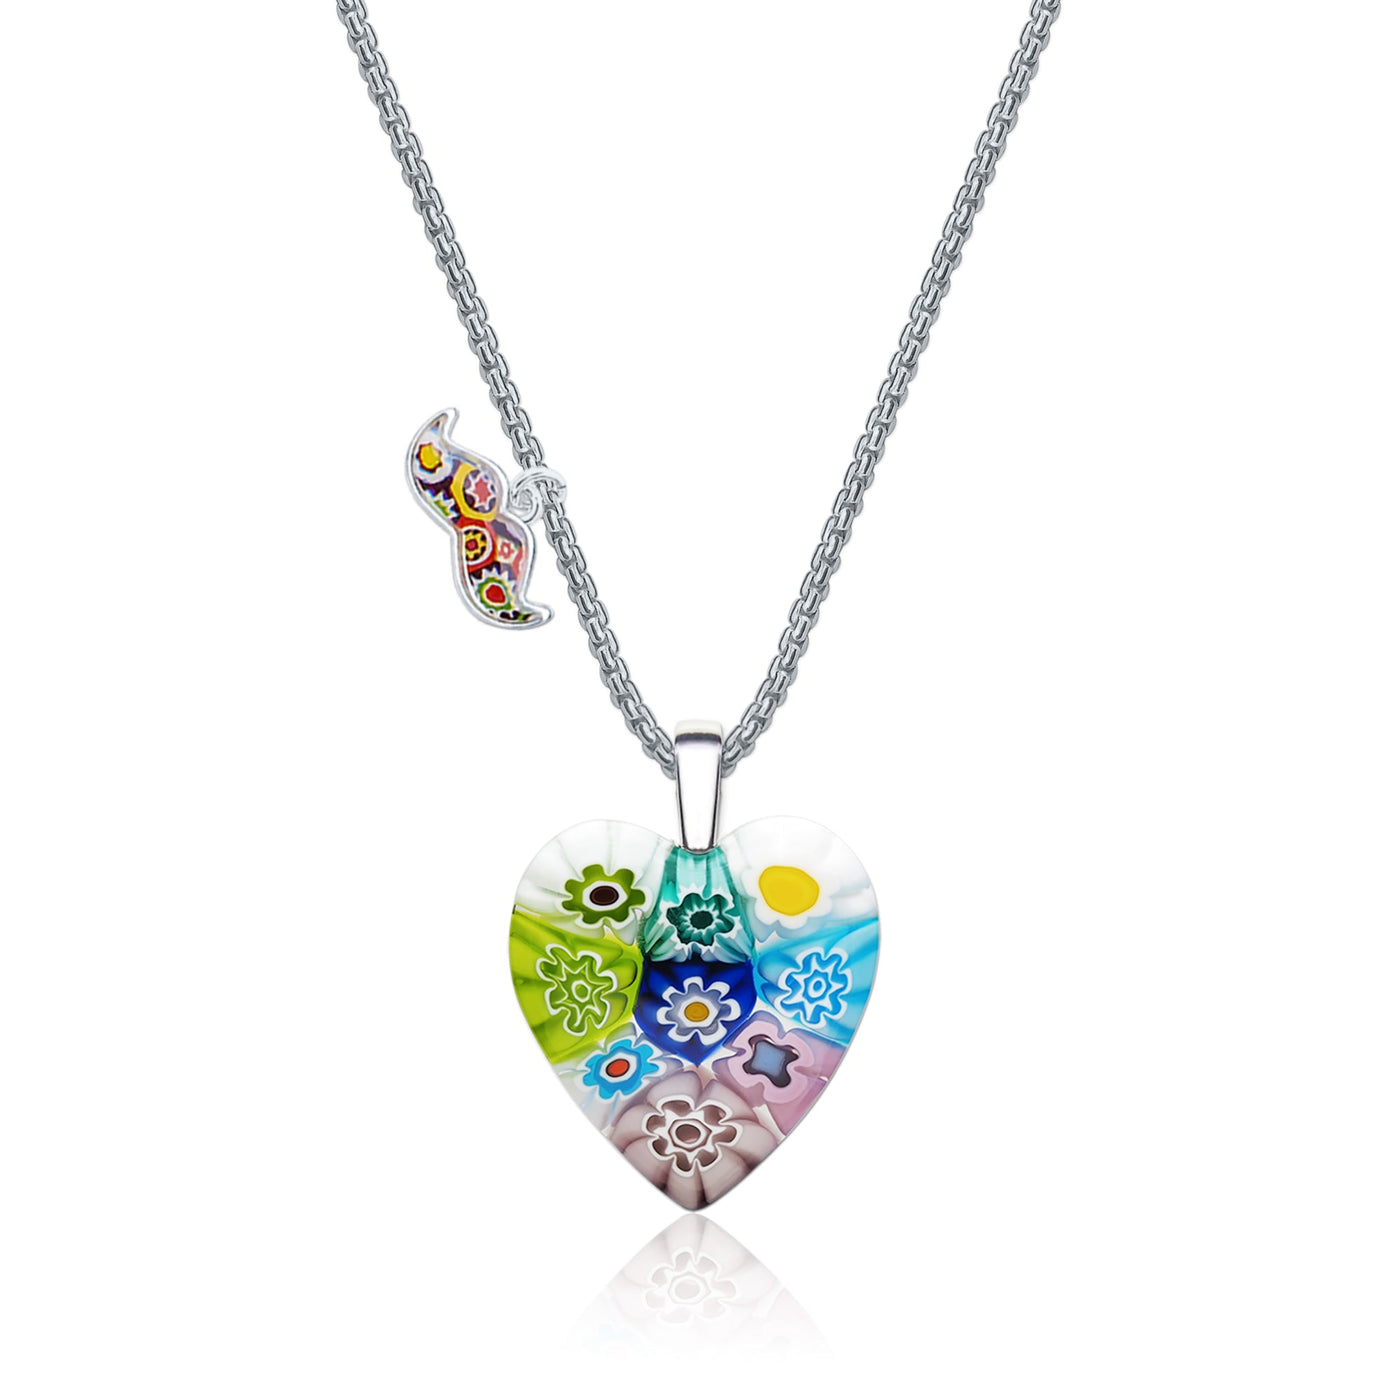 Nine in Bloom Heart Necklace - 1.2mm 925 Sterling Silver [Free Upgrade] - Pendant Necklace